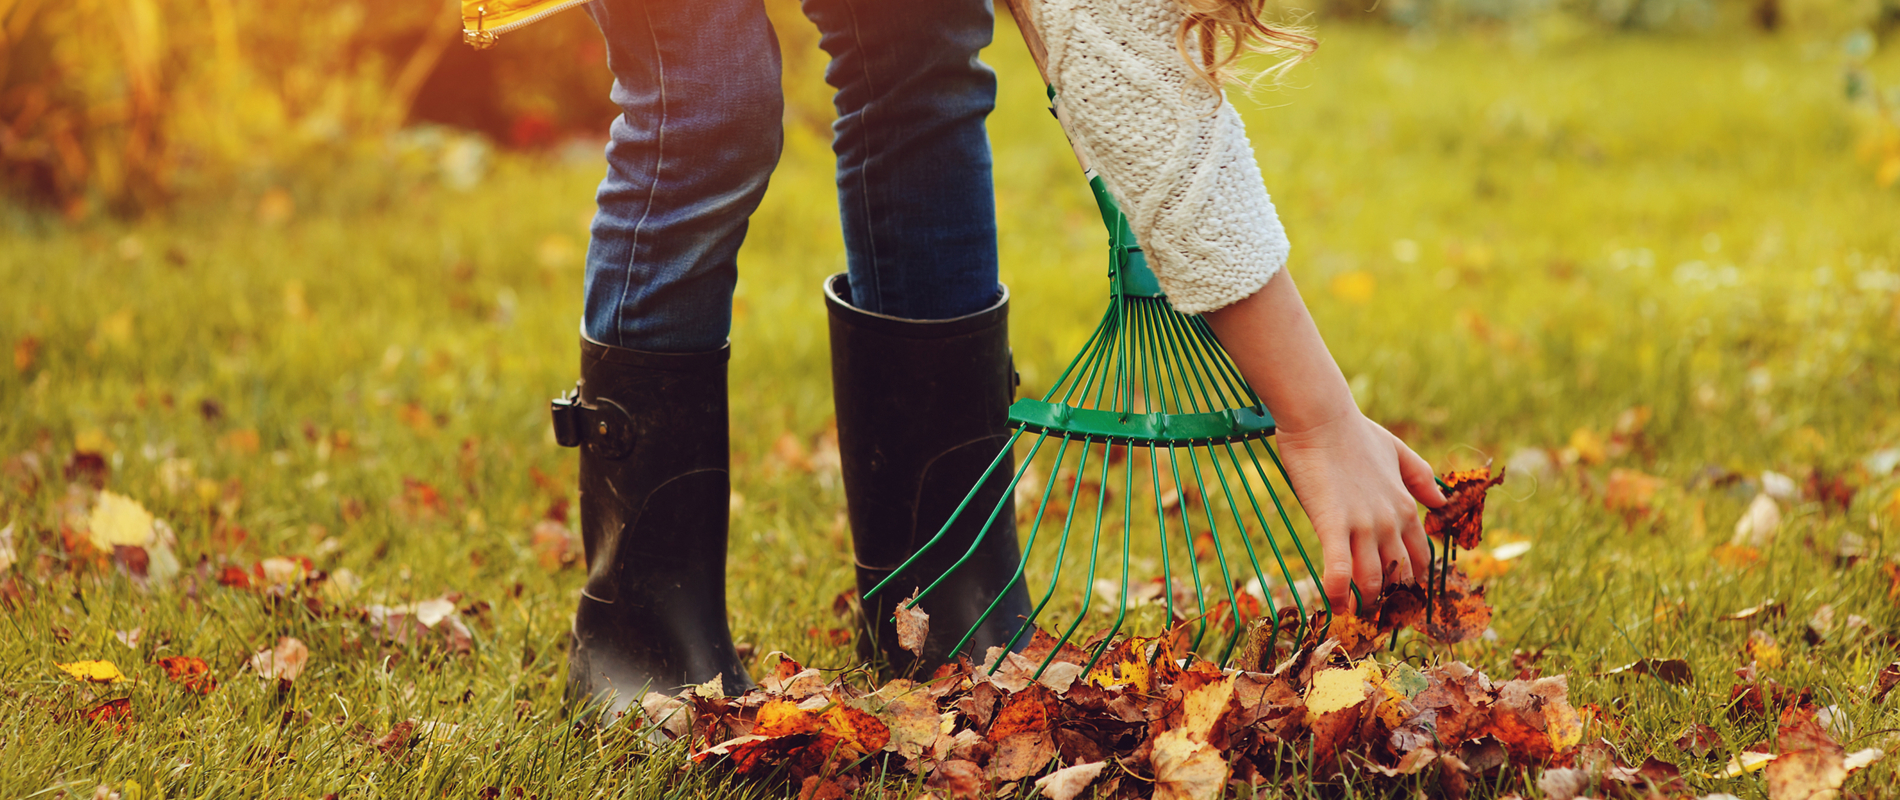 Webster Groves, MO fall lawn care - fall lawn maintenance